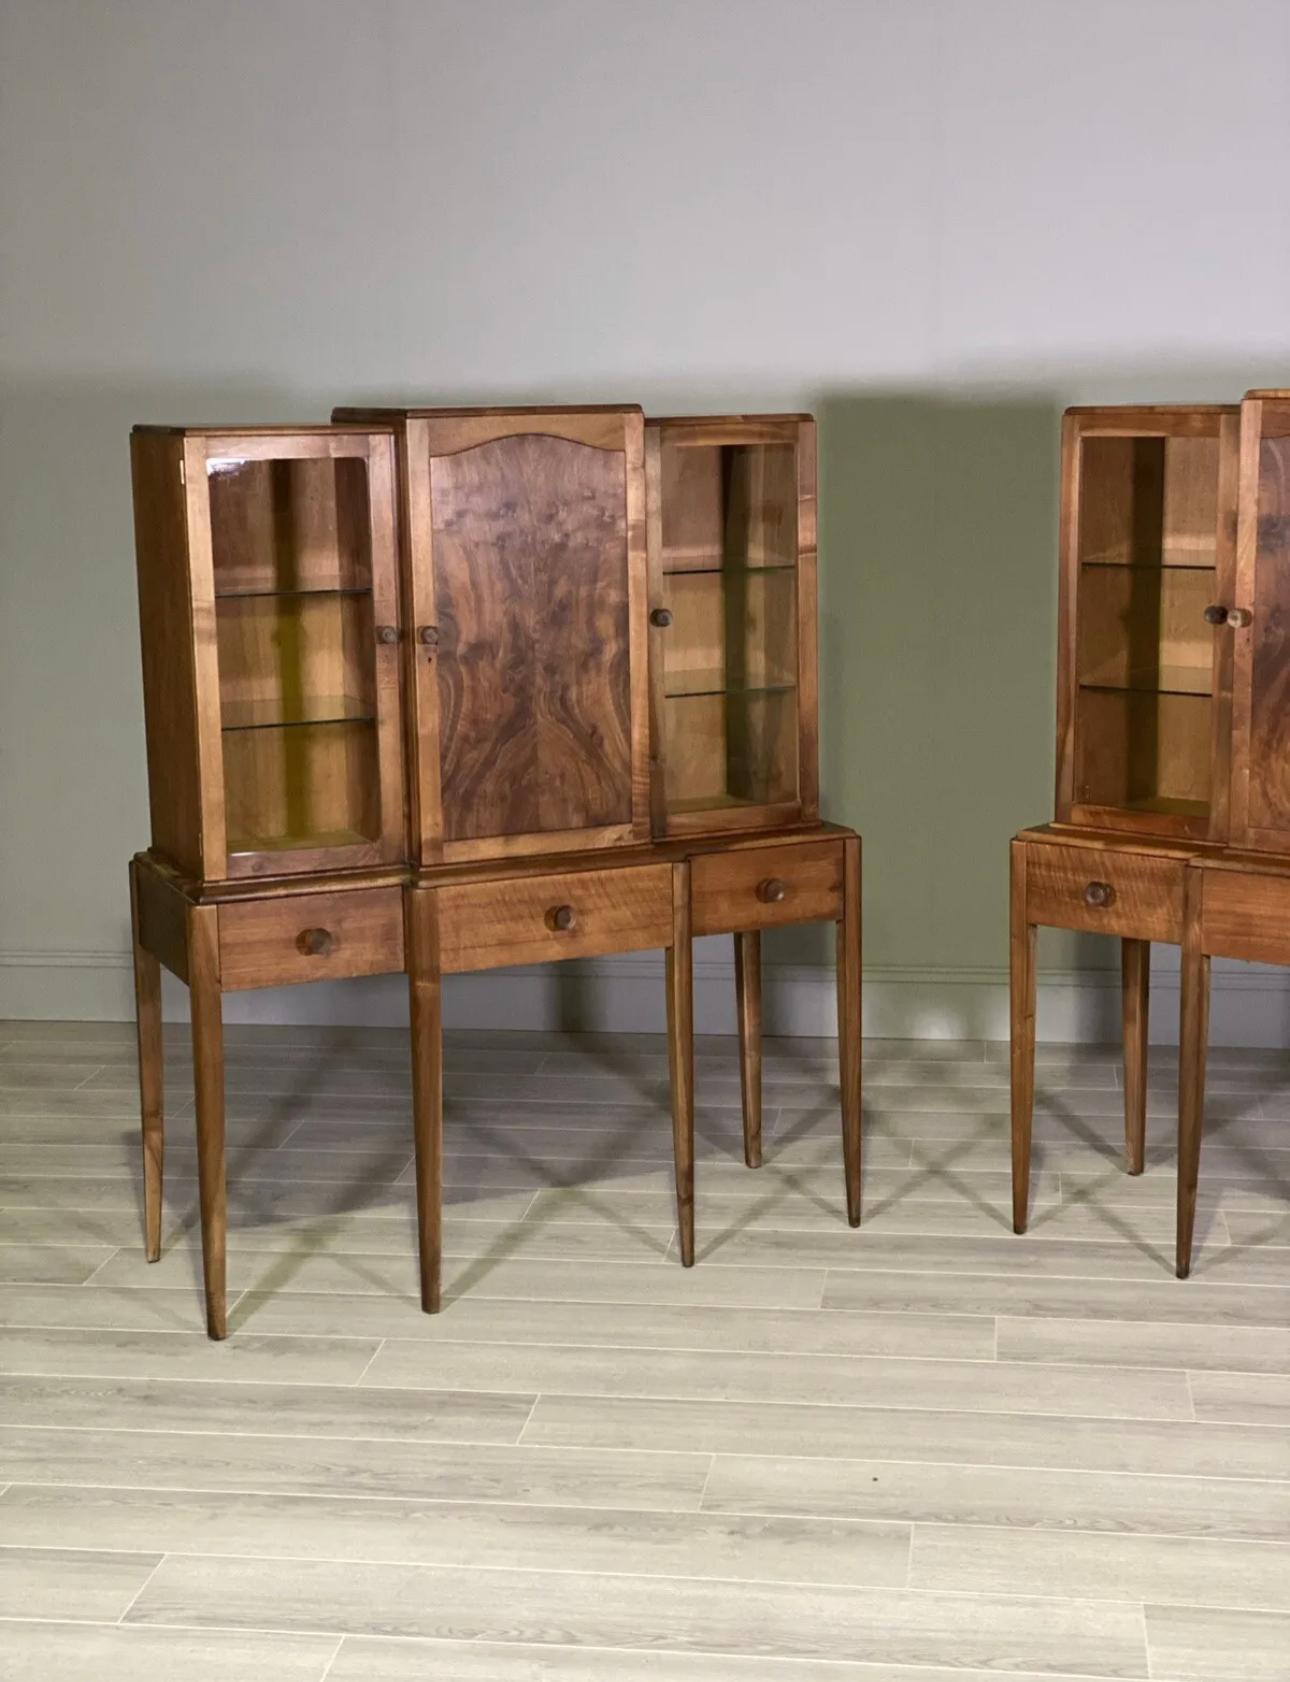 A matching pair of figured walnut cabinets by Arthur Reynolds of Ludlow dating to the 1930’s. Each cabinet consists of two glazed side cupboards both with two internal glass shelves, with the main centre cupboard having two internal wood shelves